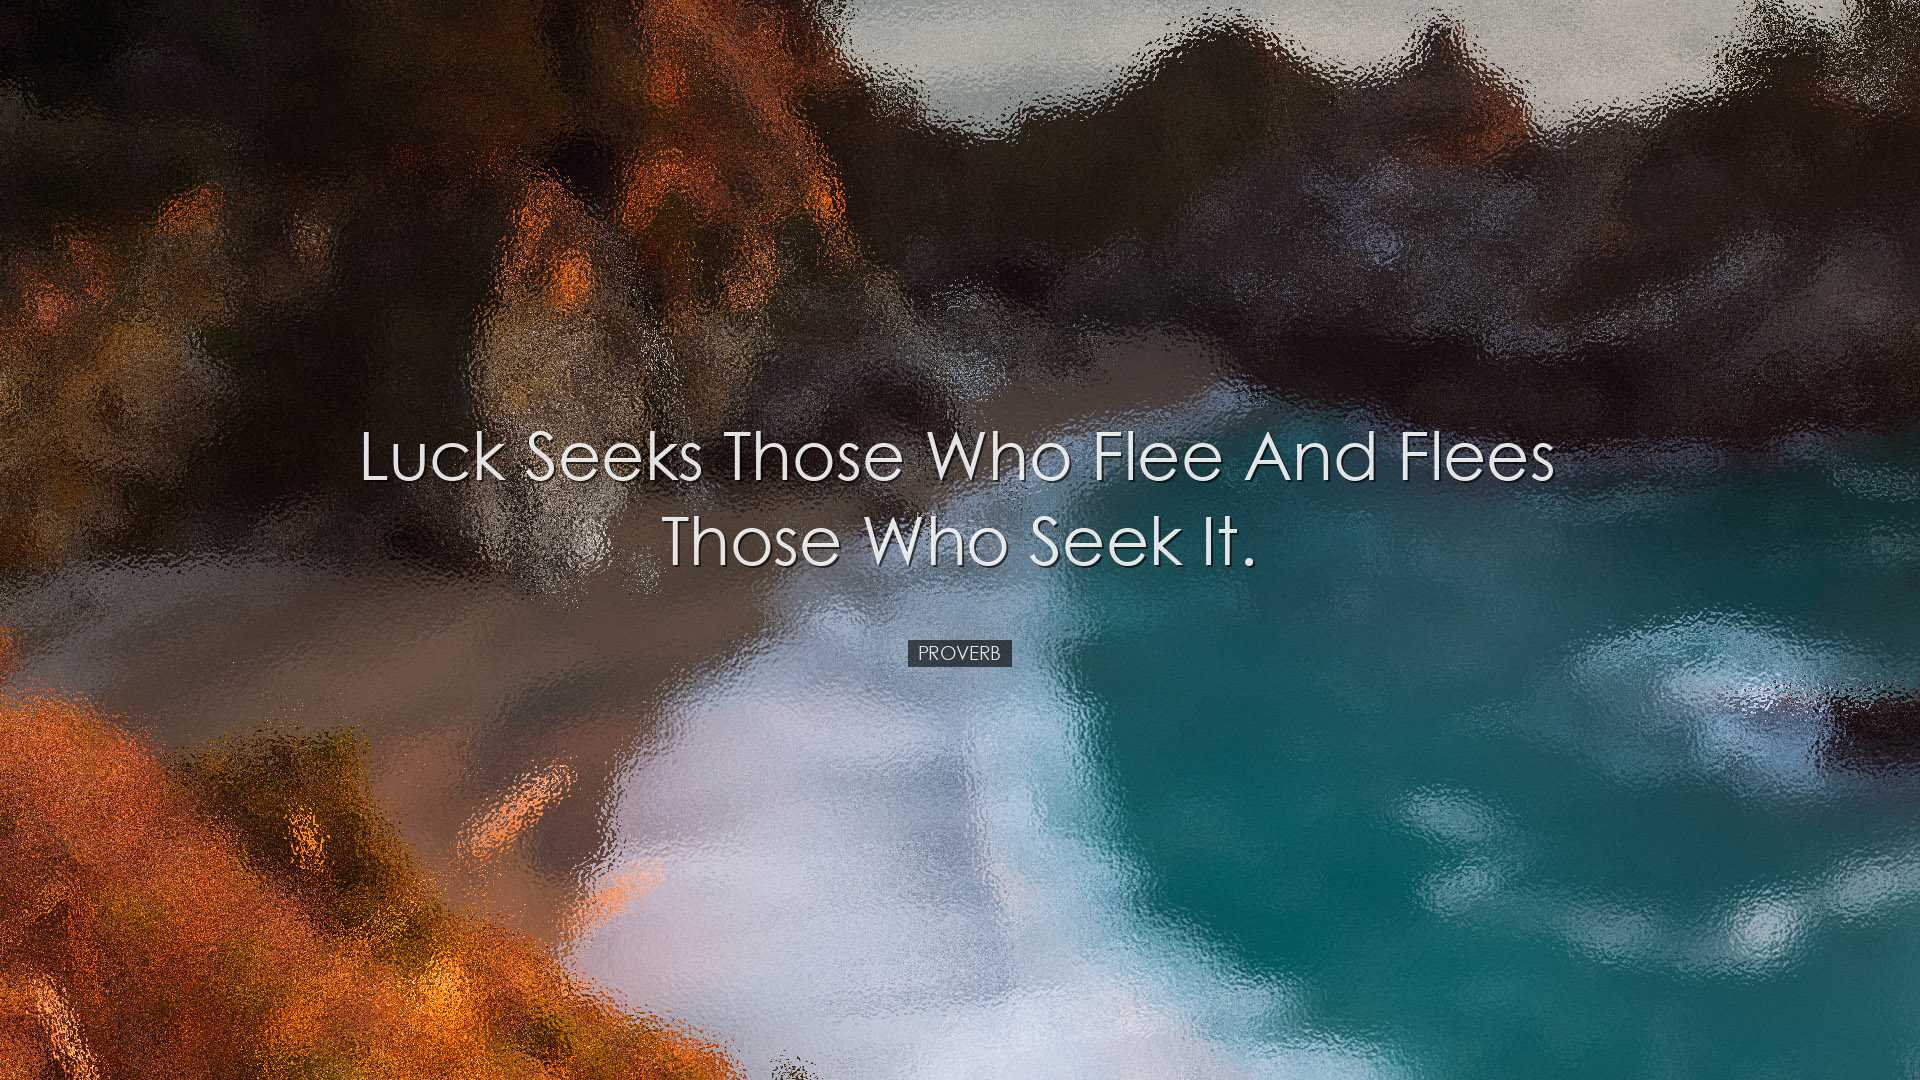 Luck seeks those who flee and flees those who seek it. - Proverb